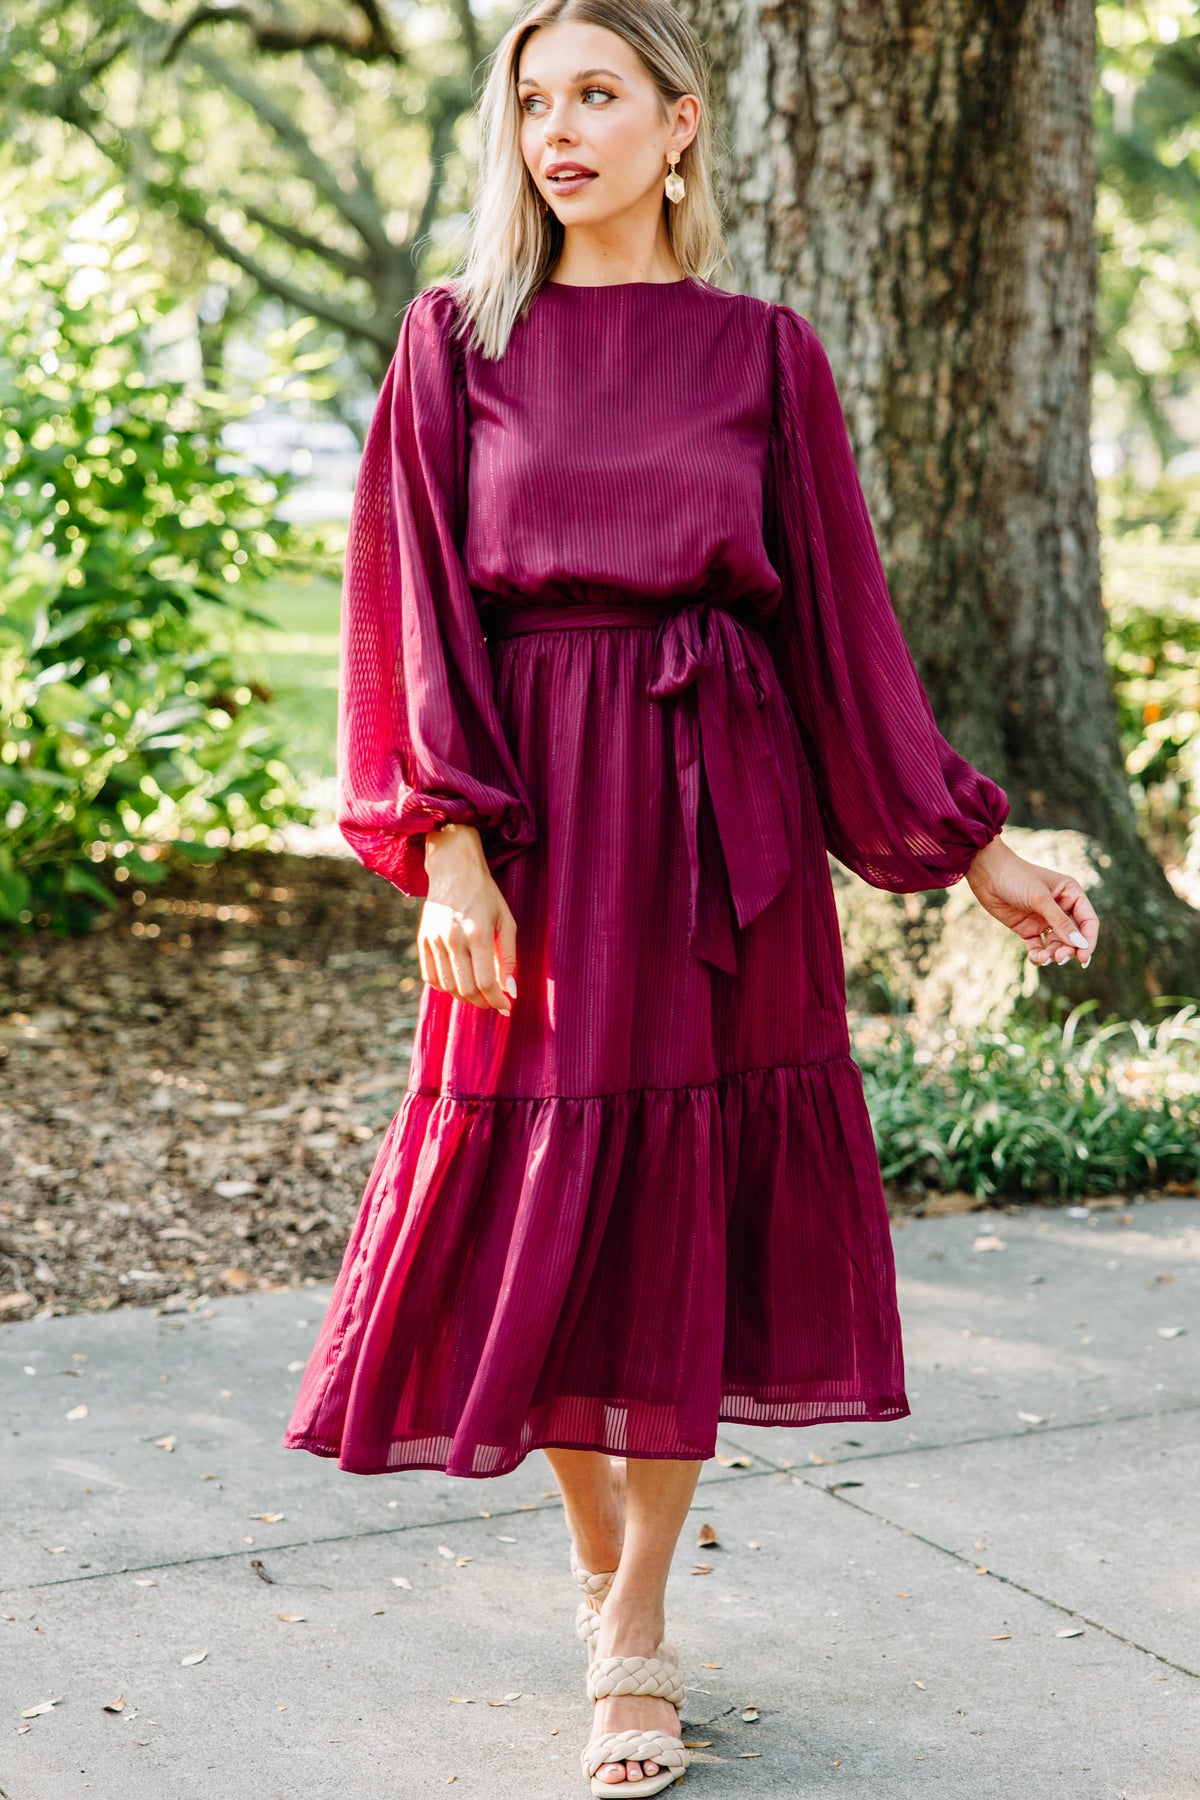 Have Some Fun Burgundy Red Midi Dress – Shop the Mint